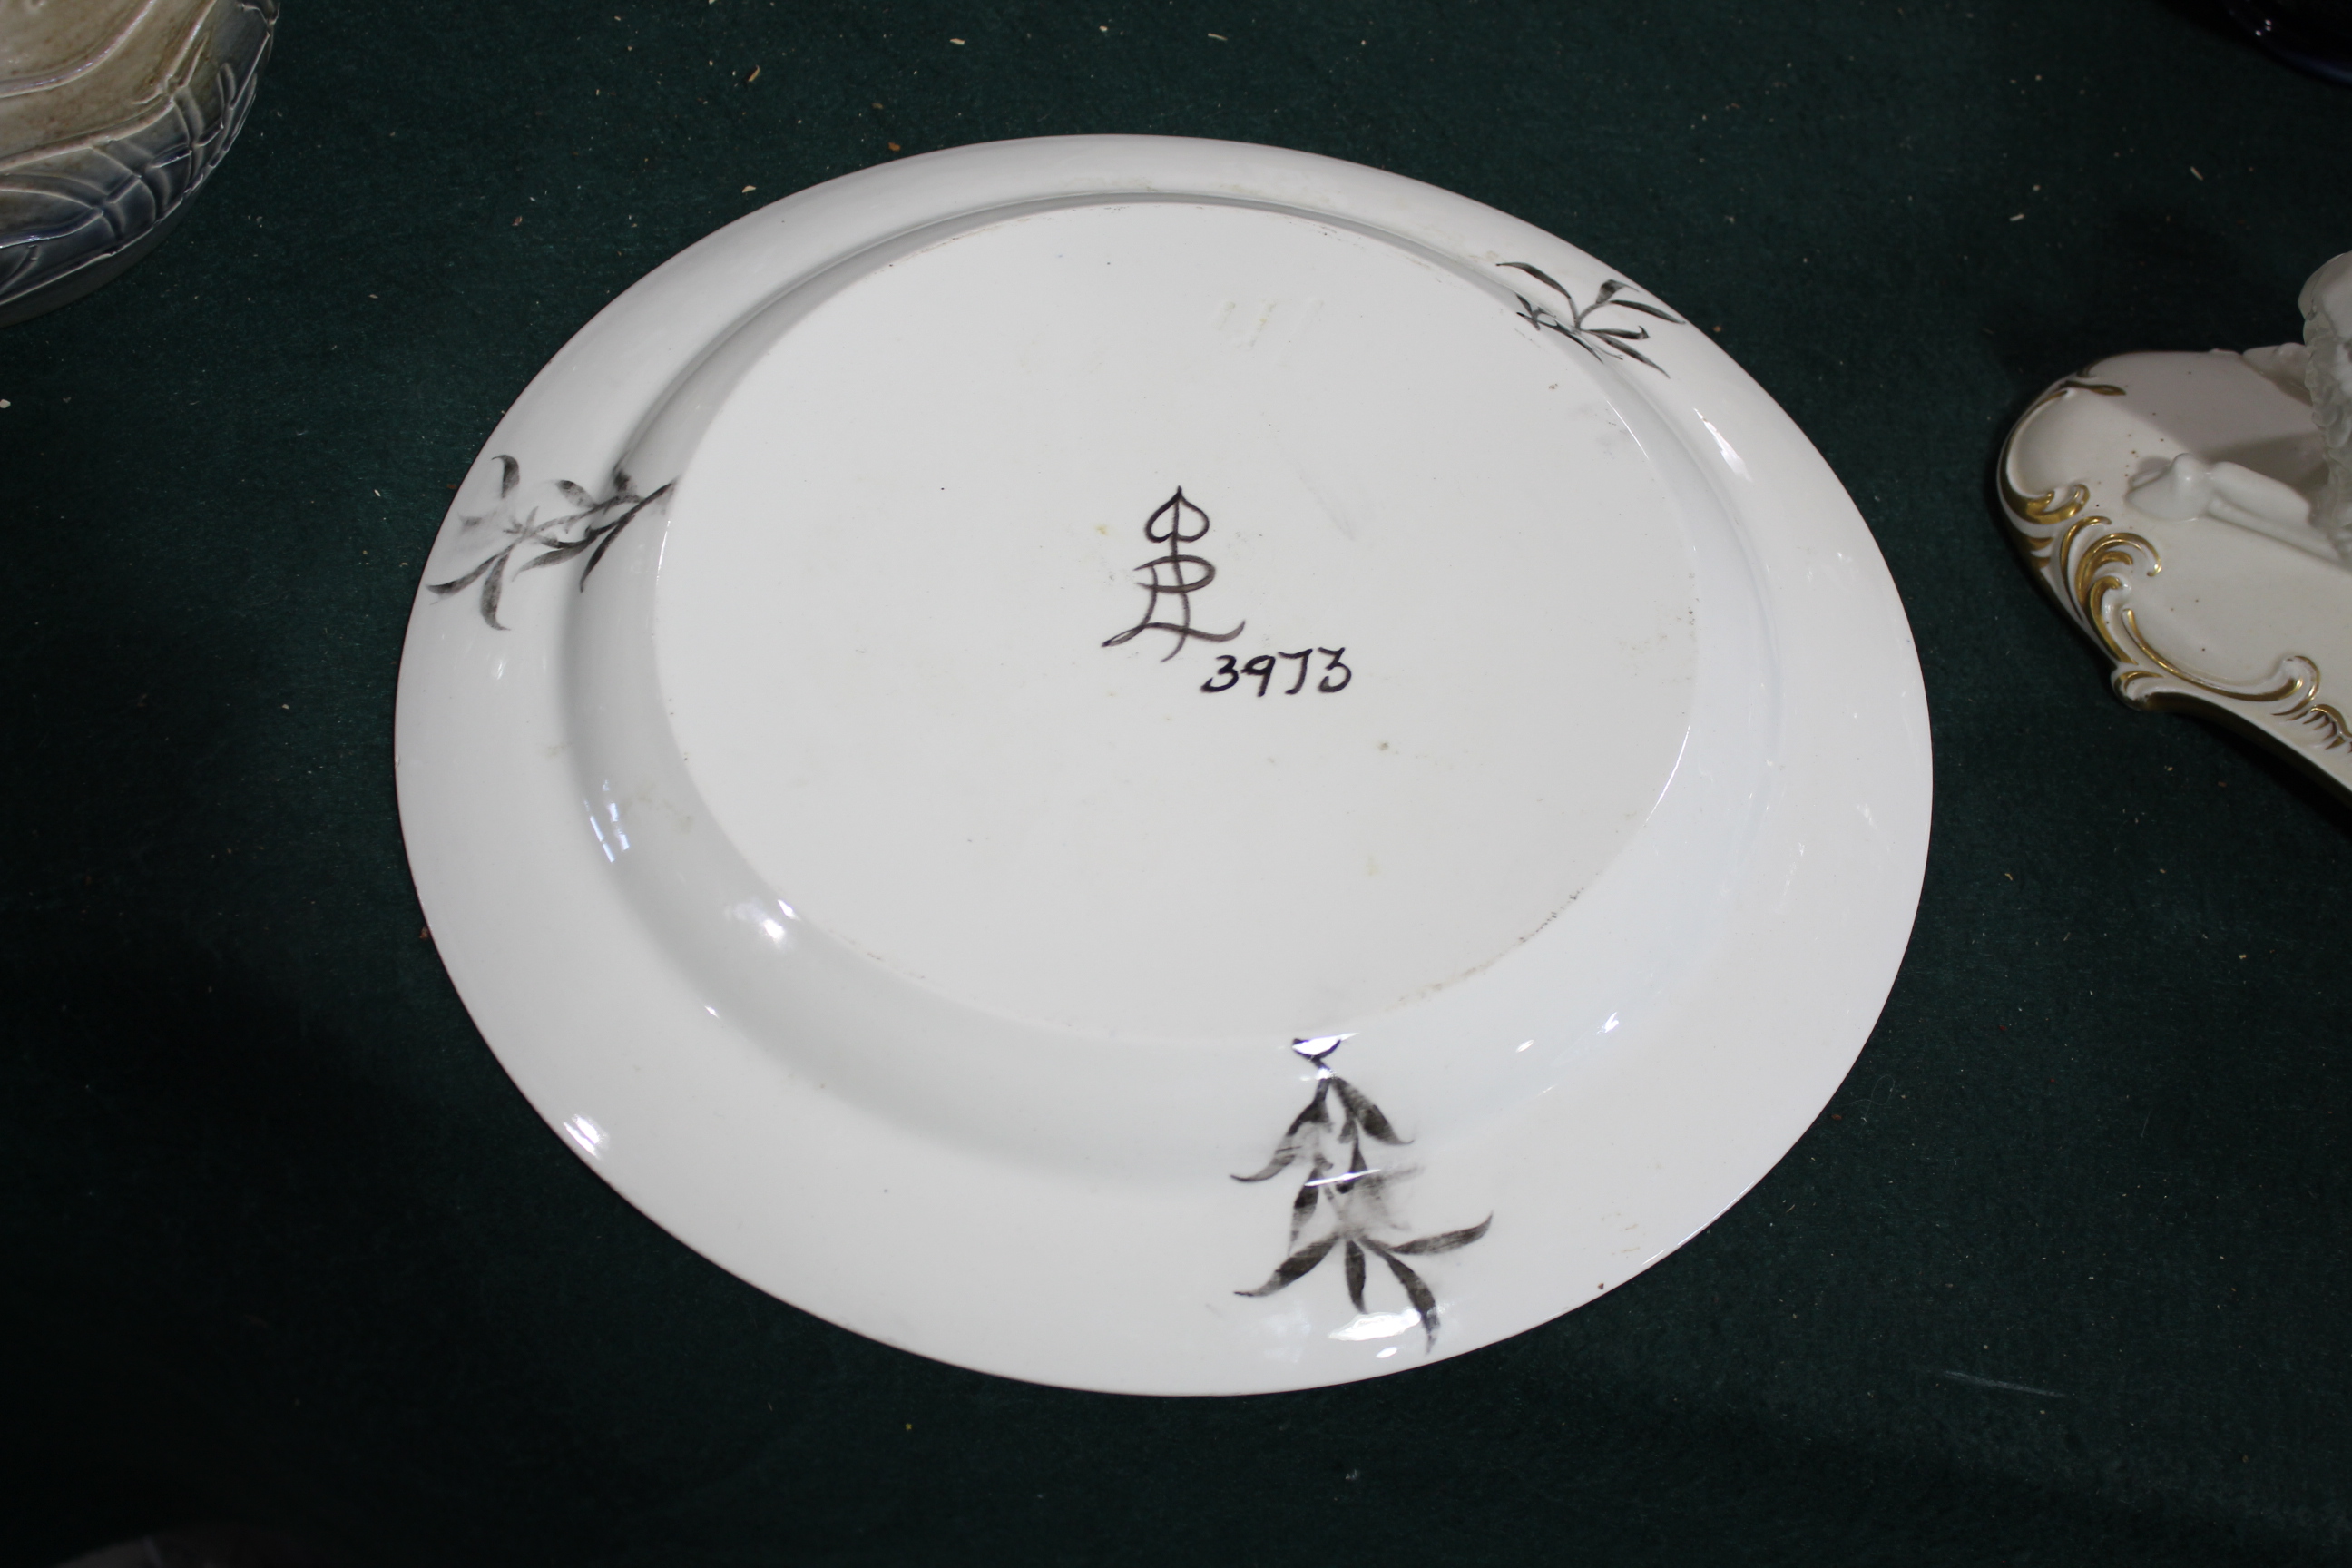 WEDGWOOD POTTERY DISH - LOUISE POWELL the large dish painted with a star shaped motif in the centre, - Image 5 of 11